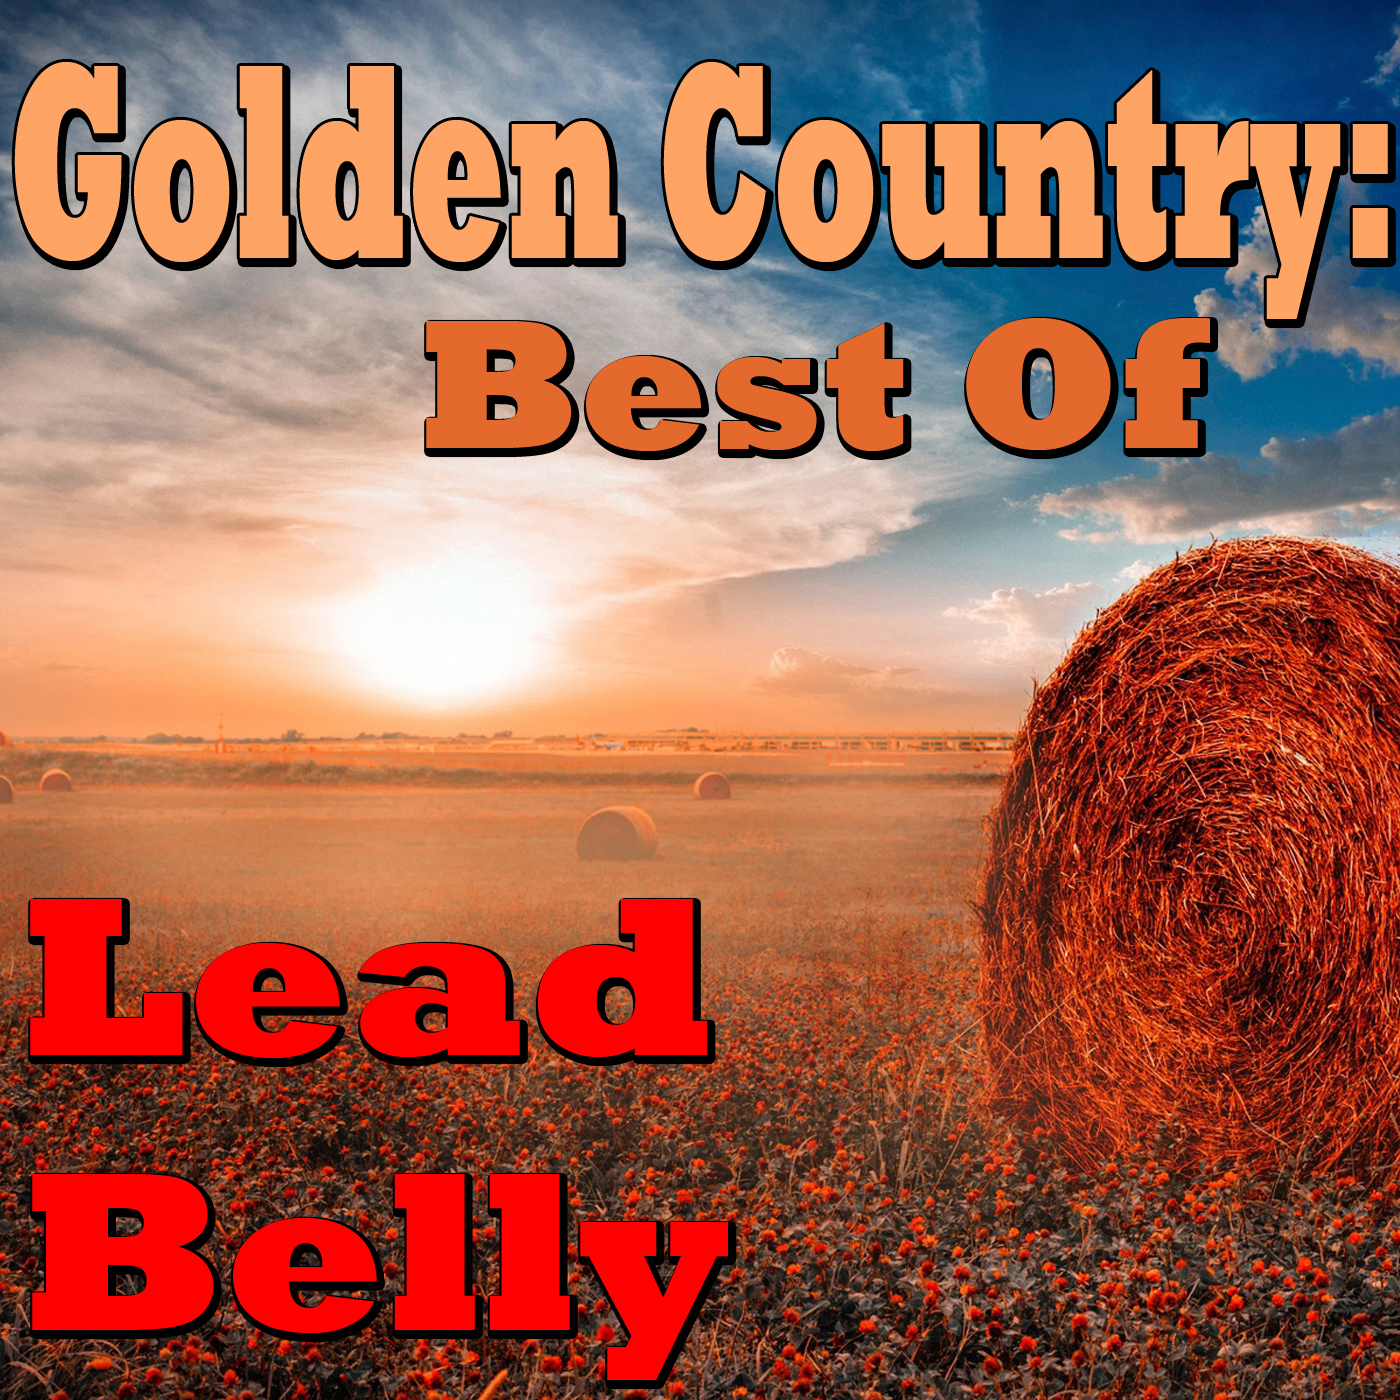 Golden Country: Best Of Lead Belly